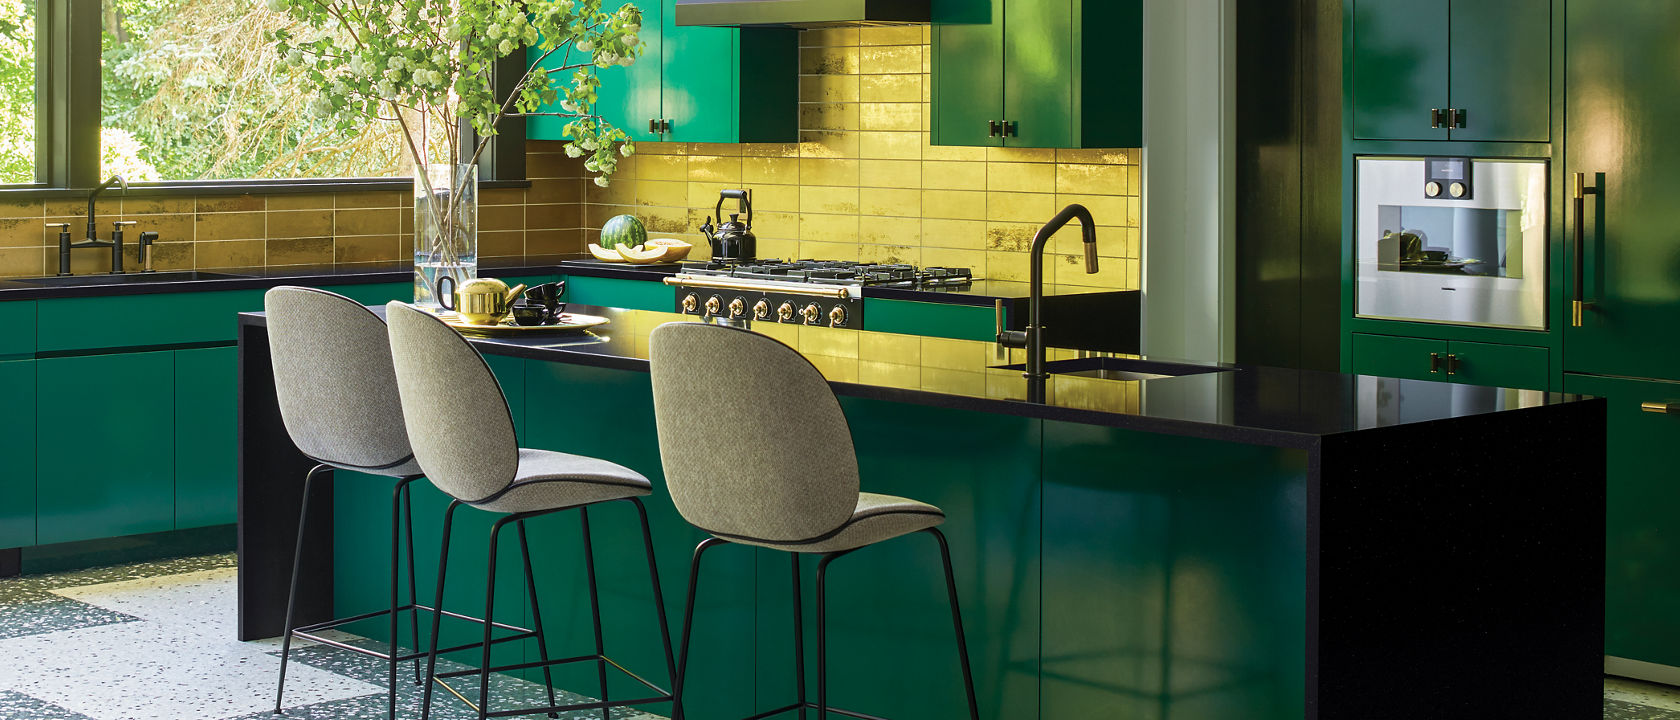 Designer : A. Villalobos 
Instagram: @avillalobosdesign
â ¢Kitchen cabinets are painted in â  Chrome Greenâ   by Benjamin Moore in High gloss 
â ¢Countertop are Black Pool by Cambria 
â ¢Stove is by La Cornue 
â ¢Backsplash is Elenco Gold Tile by Ann Sacks
â ¢Light over counter is name â  Porteâ   by Urban Electric 
â ¢Flooring is custom terrazzo tiles by A. Villalobos through Concrete Collaborative 
â ¢Set of Plates over the stove are Portuguese Majolica through Christieâ  s 
â ¢Counter stool is The Beetle by Gubi